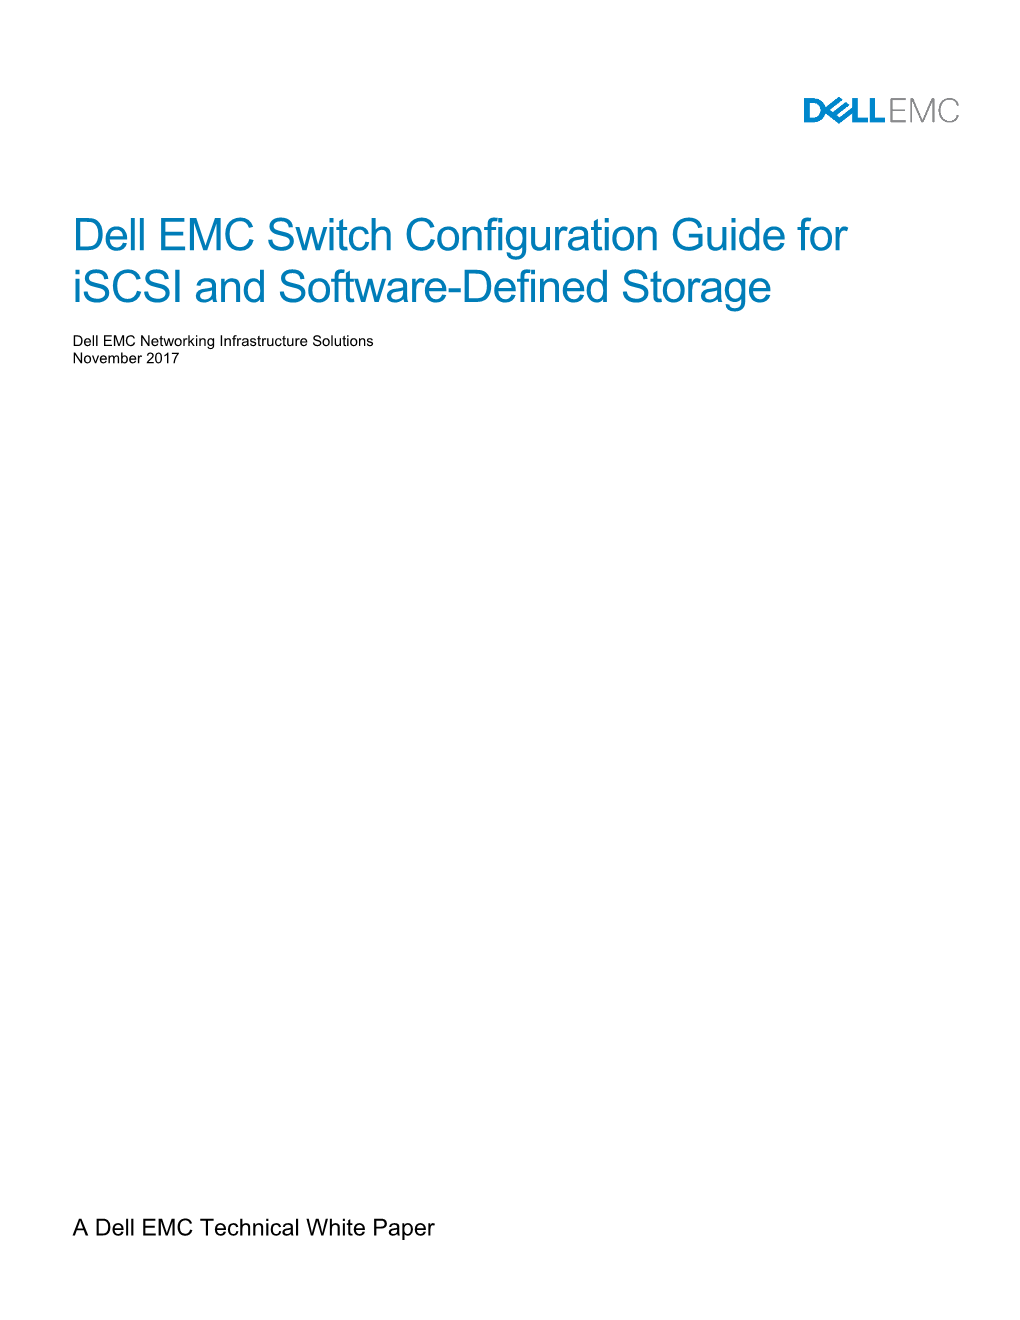 Dell EMC Switch Configuration Guide for Iscsi and Software-Defined Storage